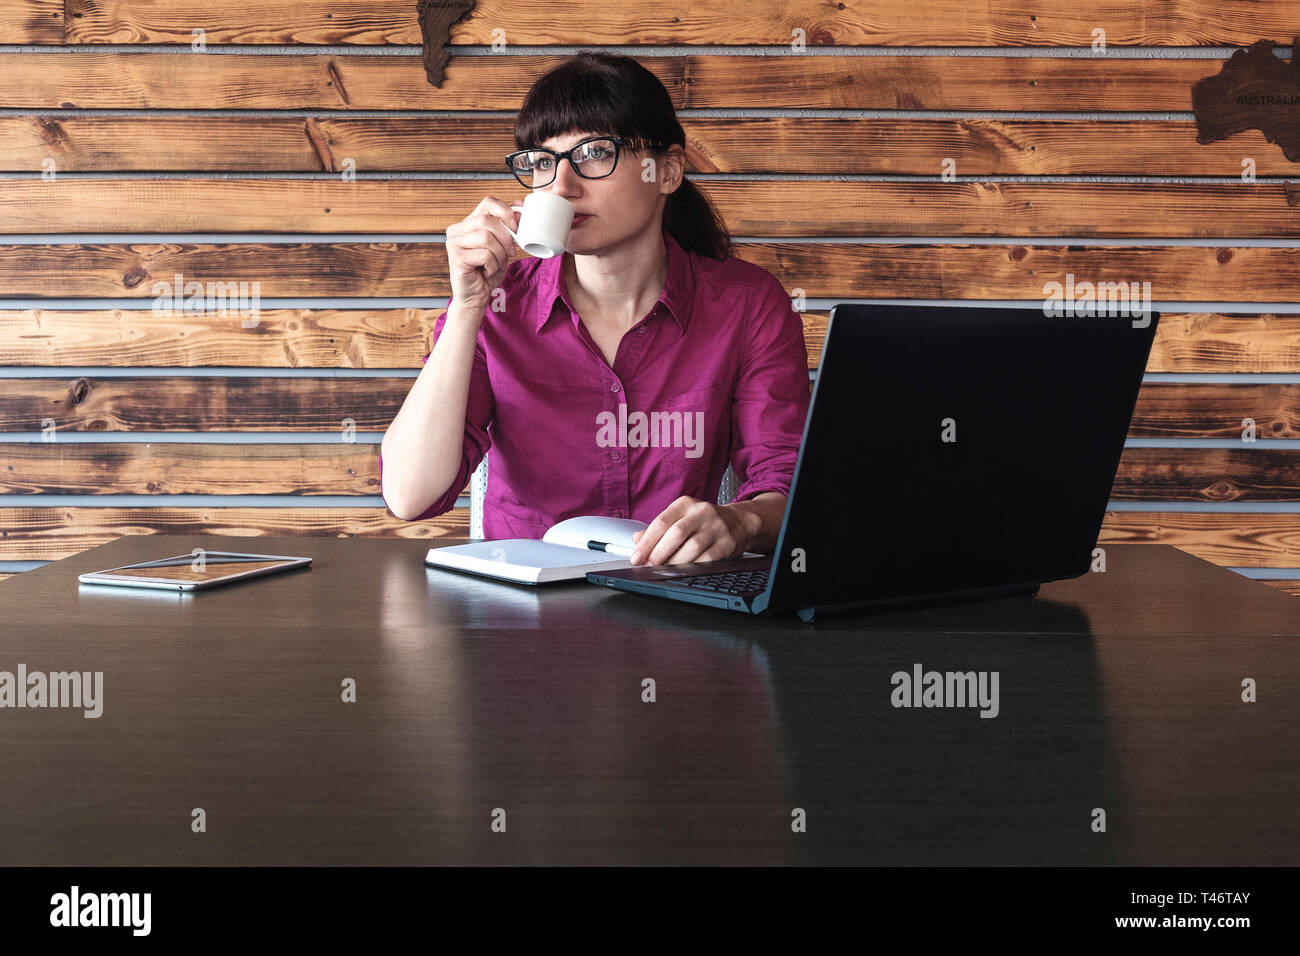 Businesswoman concentrating on her work while drinking a cup of coffee typing on her laptop computer with a serious expression Stock Photo